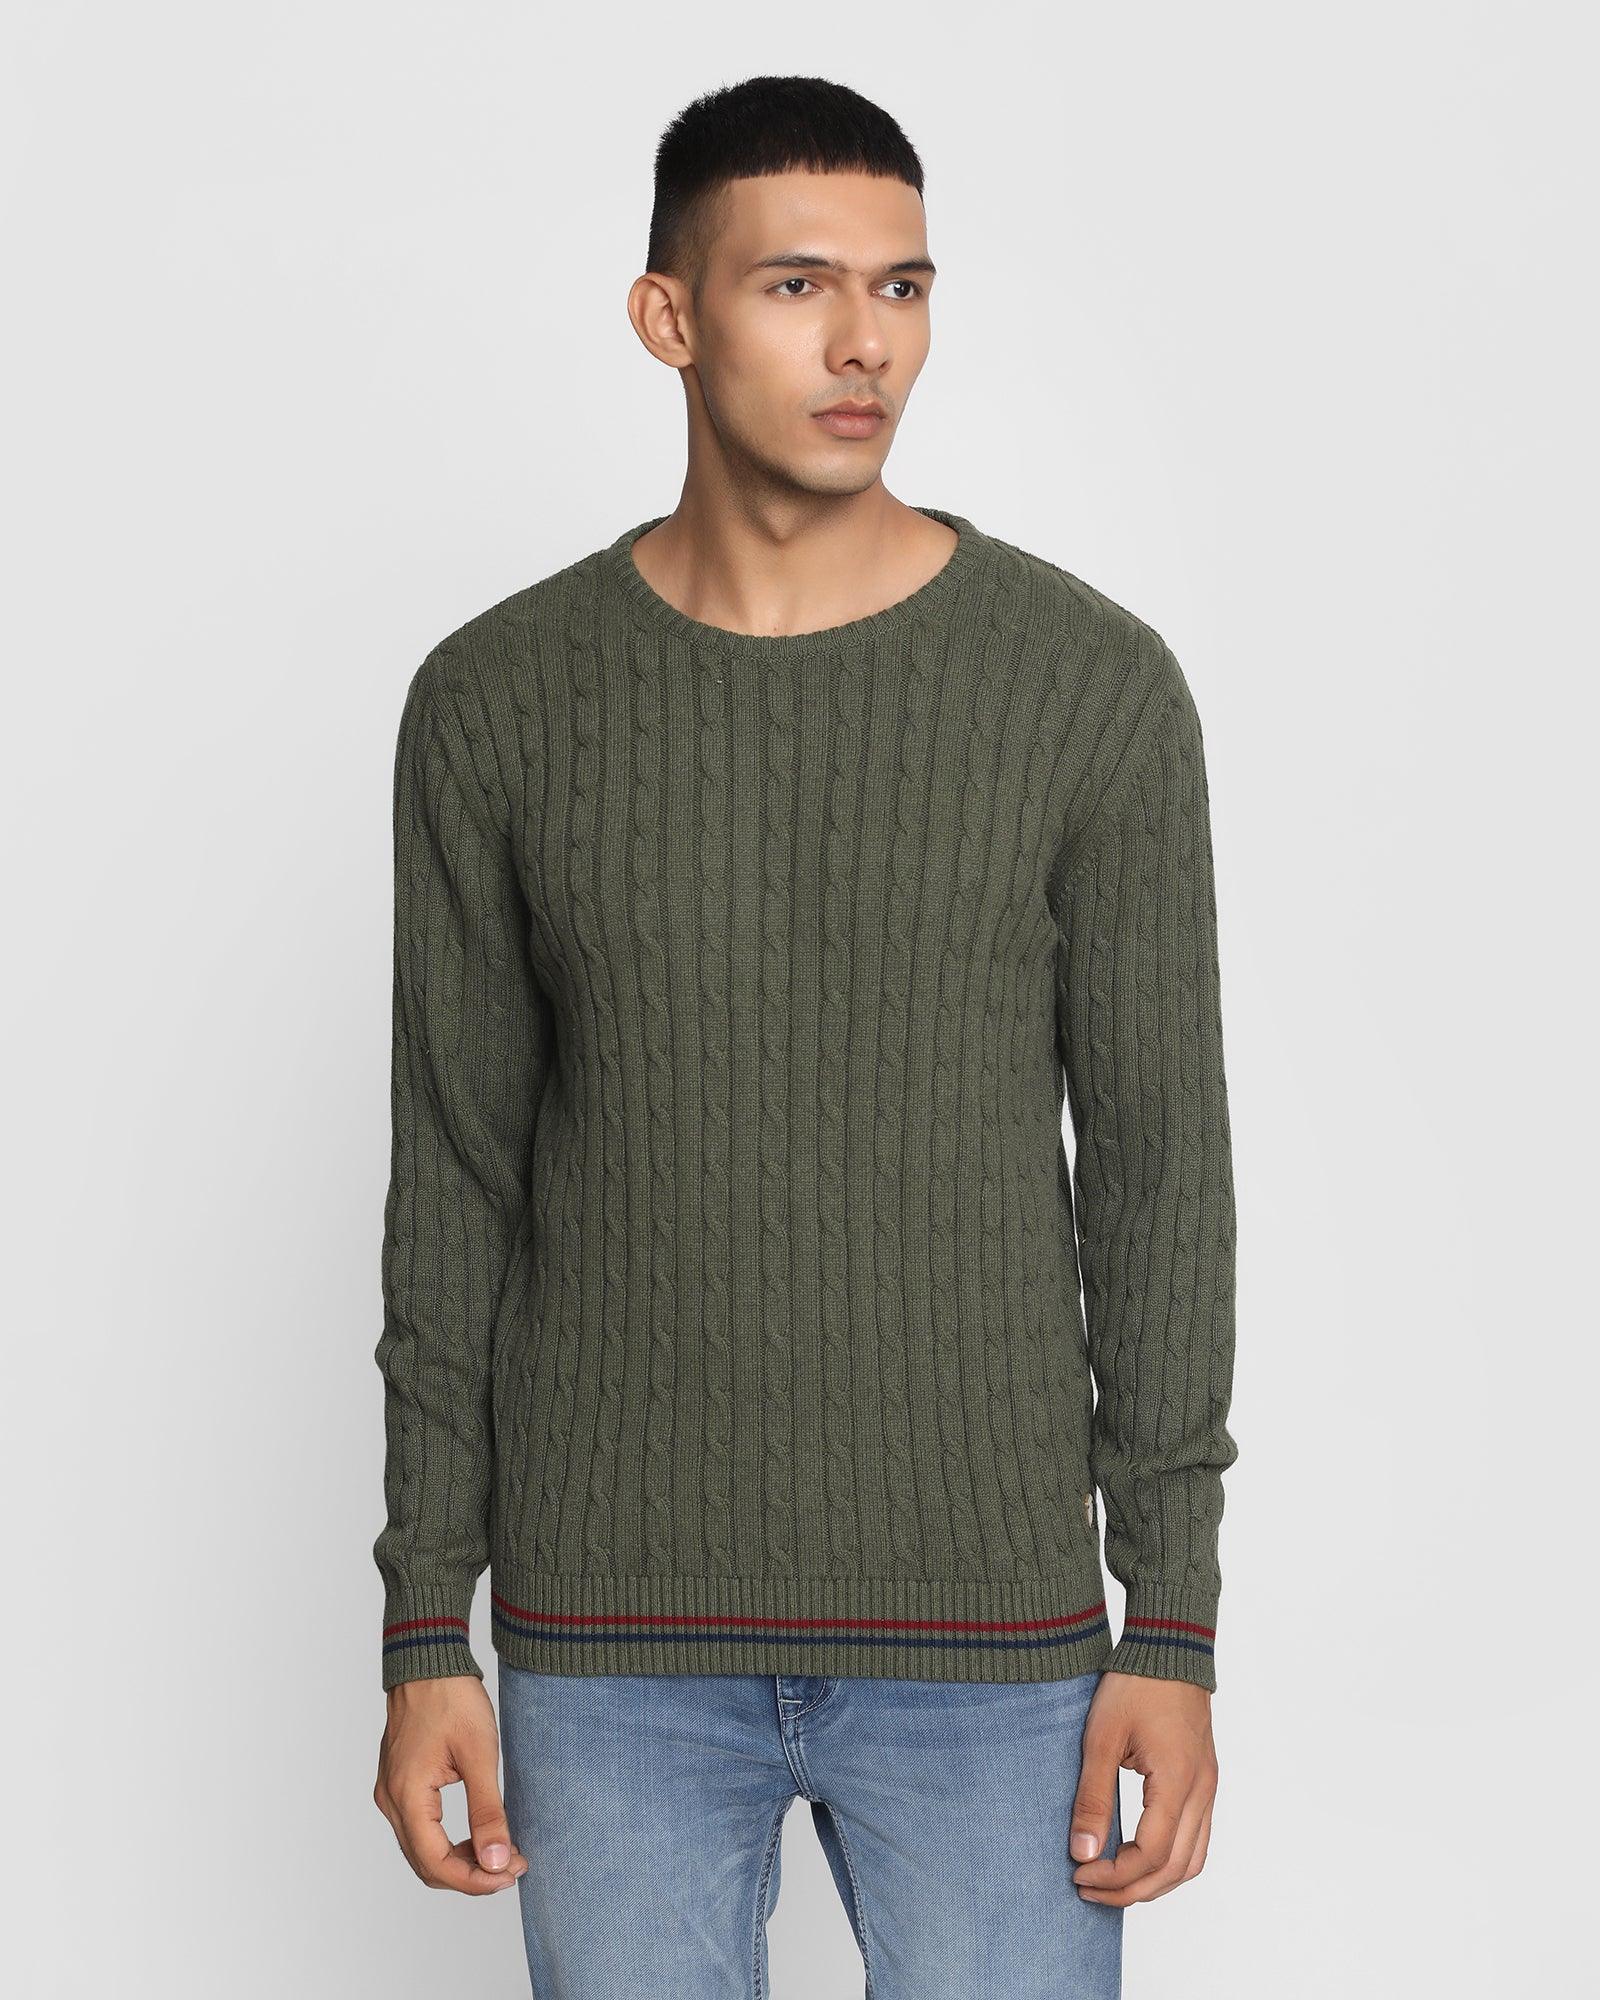 Crew Neck Olive Textured Sweater - Cable